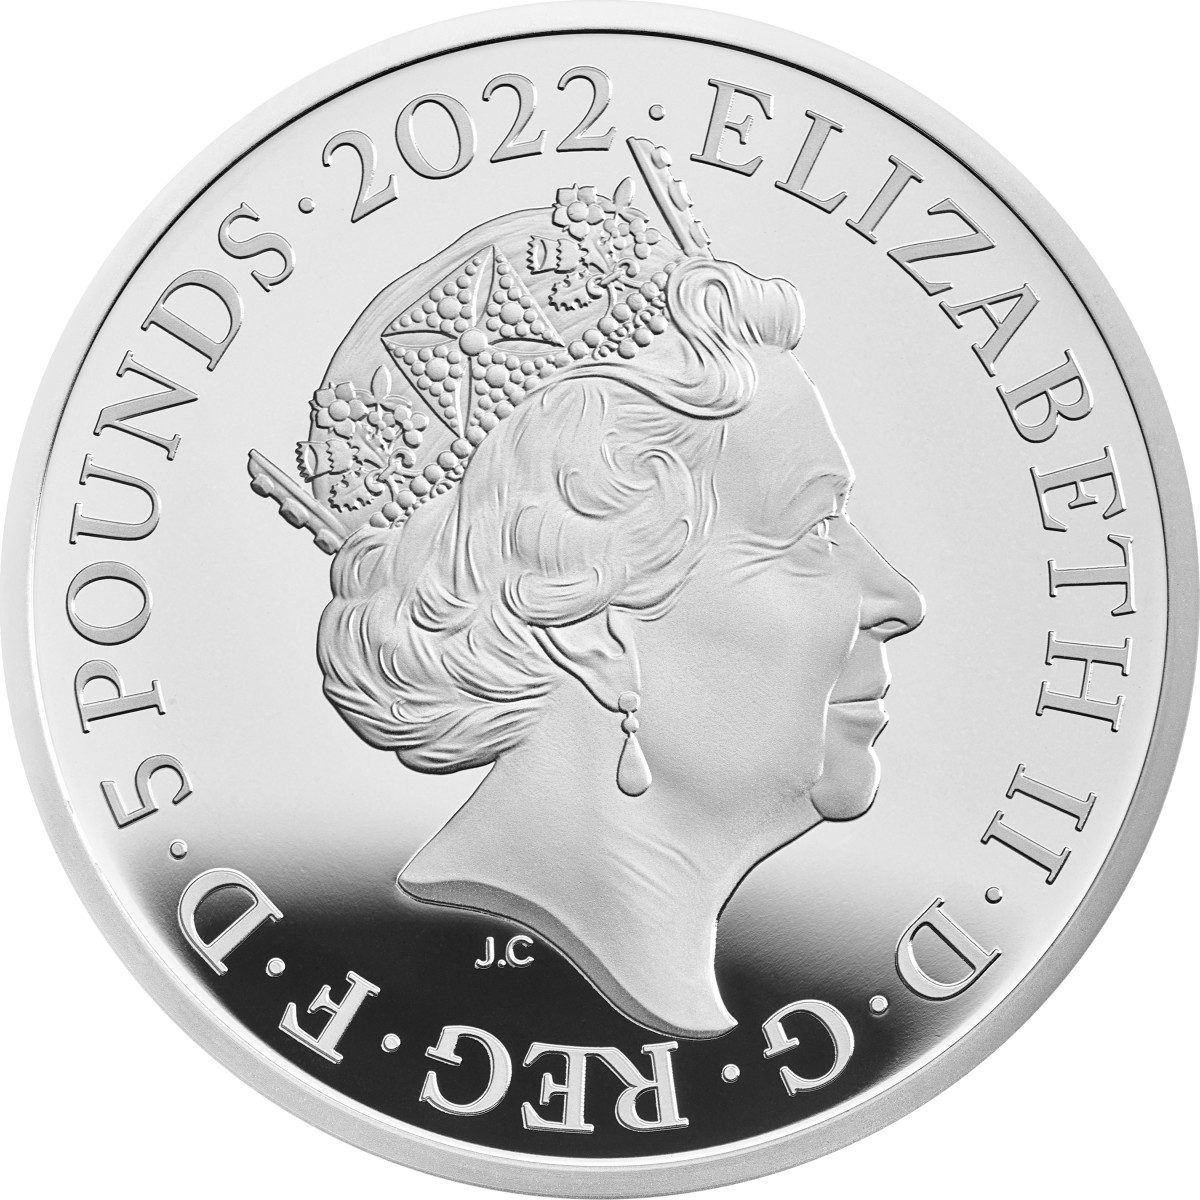 Images courtesy of The Royal Mint.